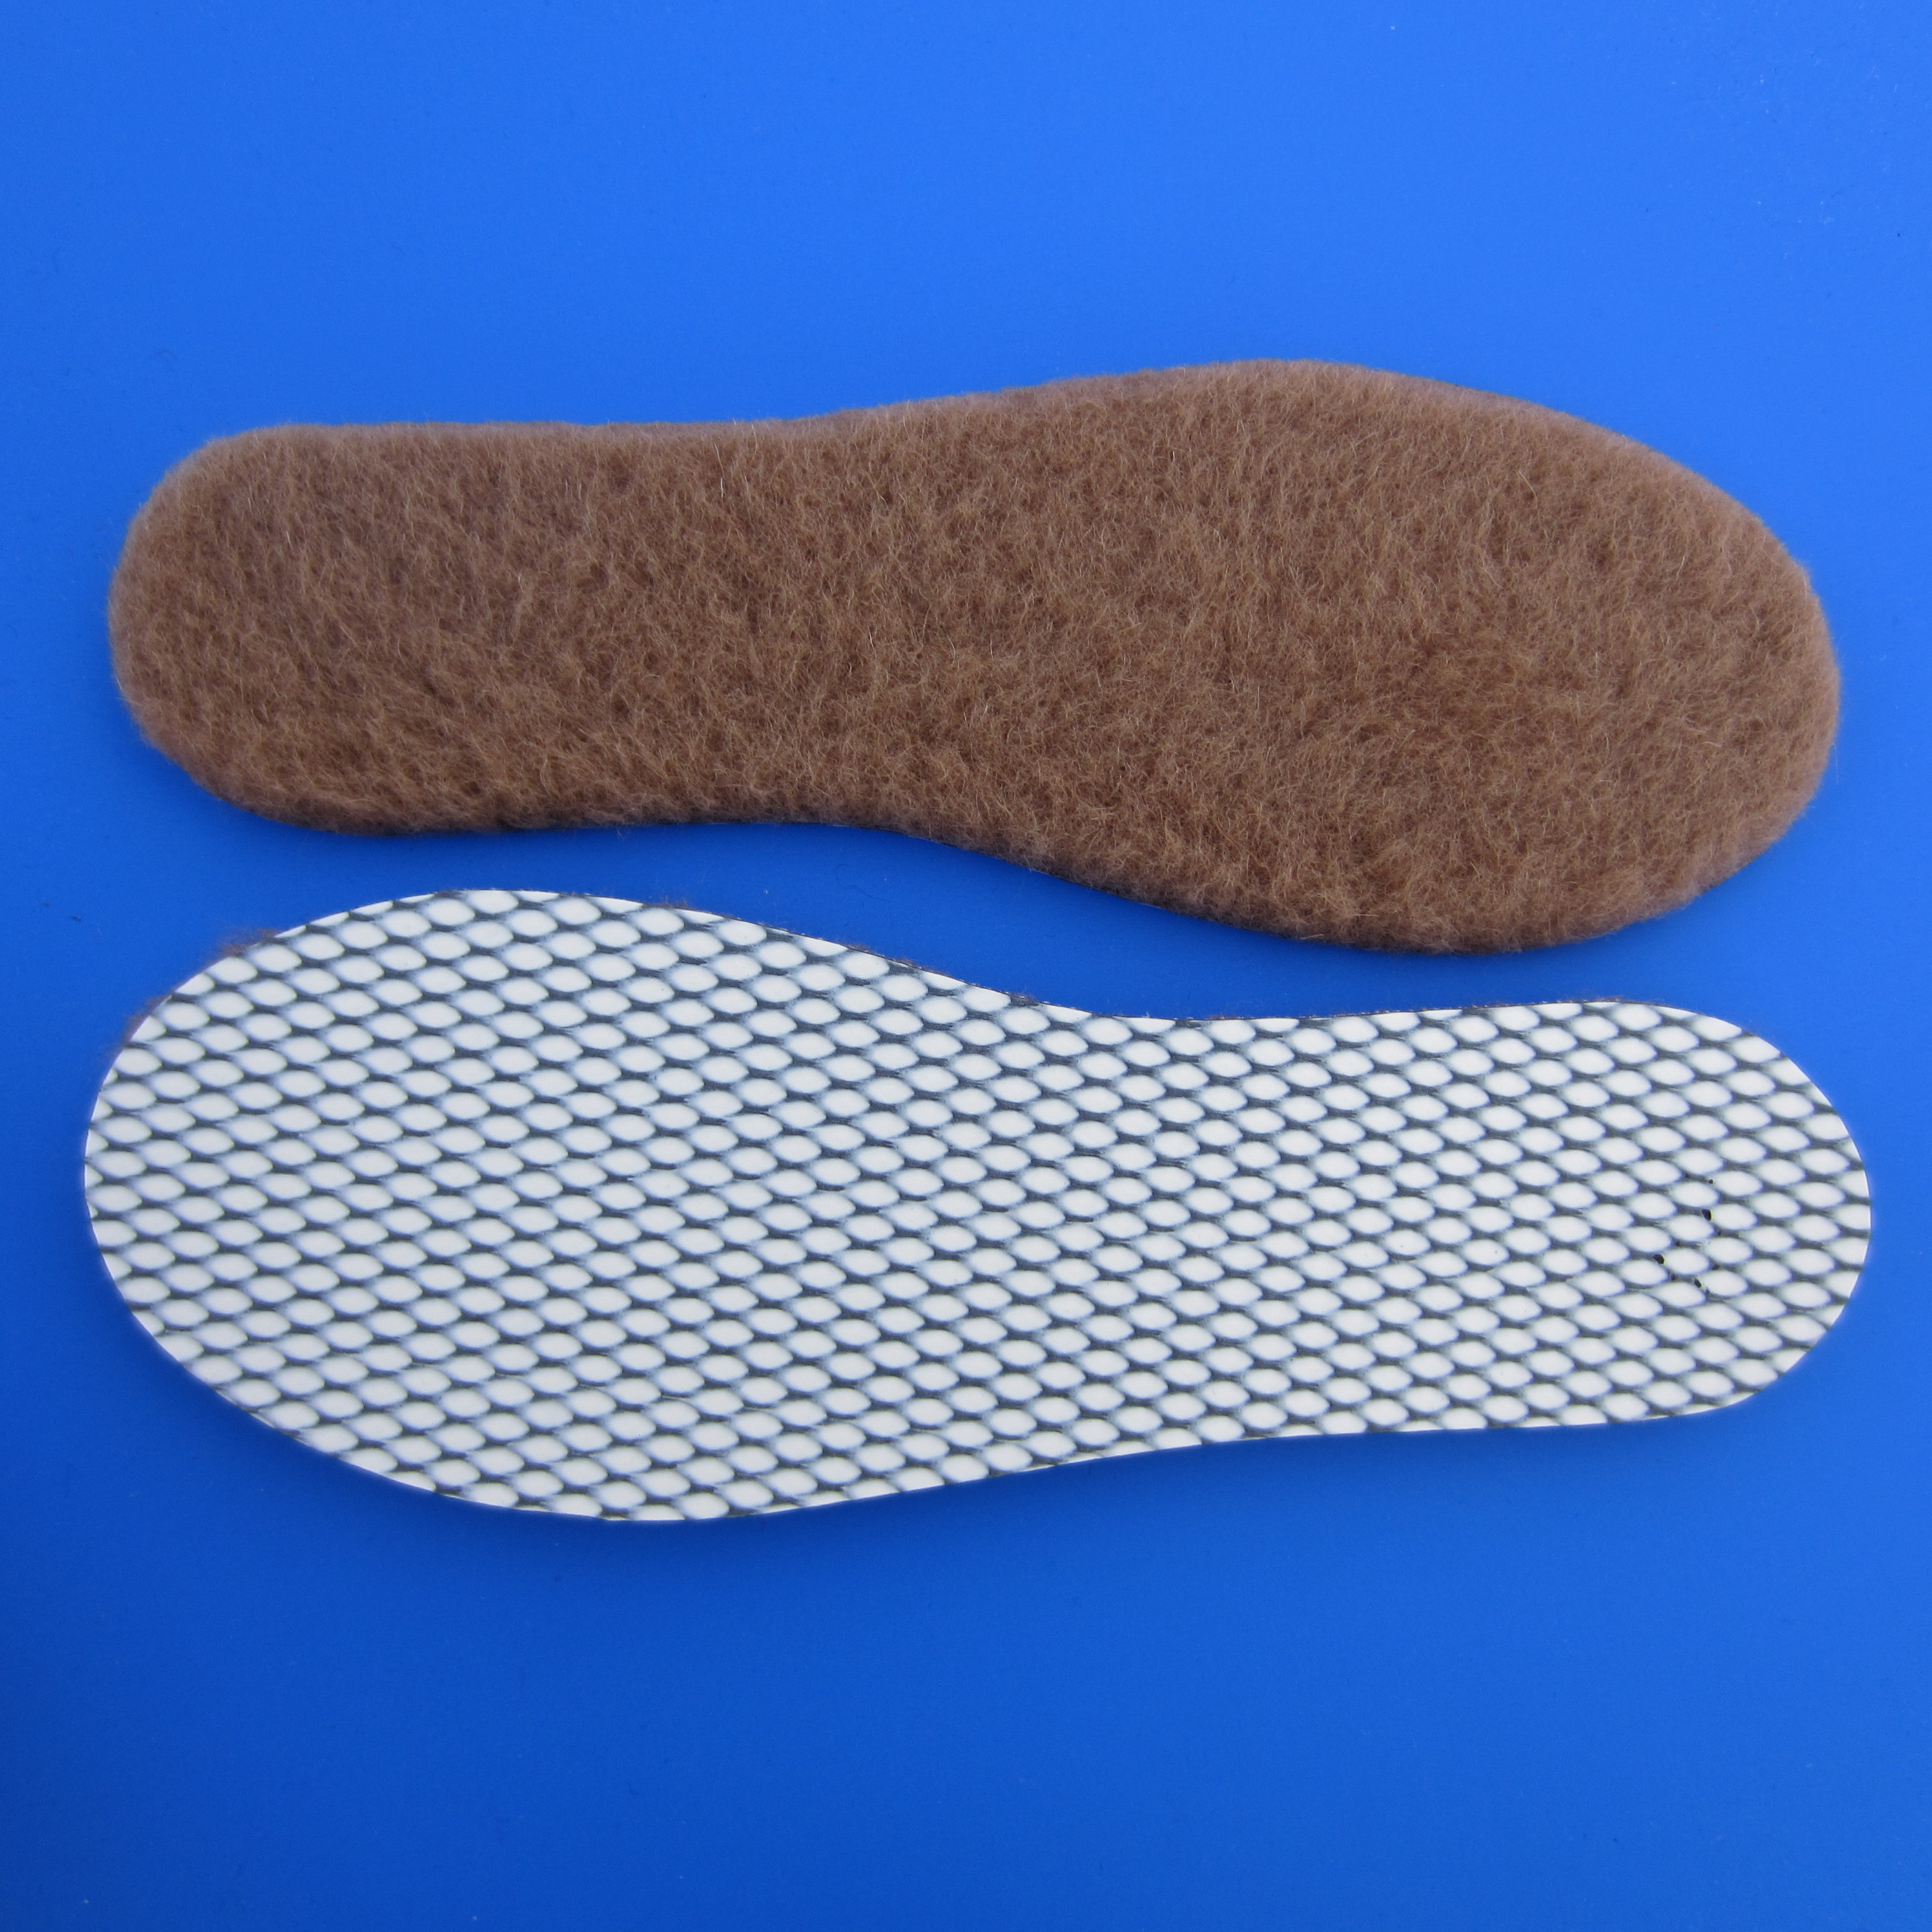 lambswool insoles